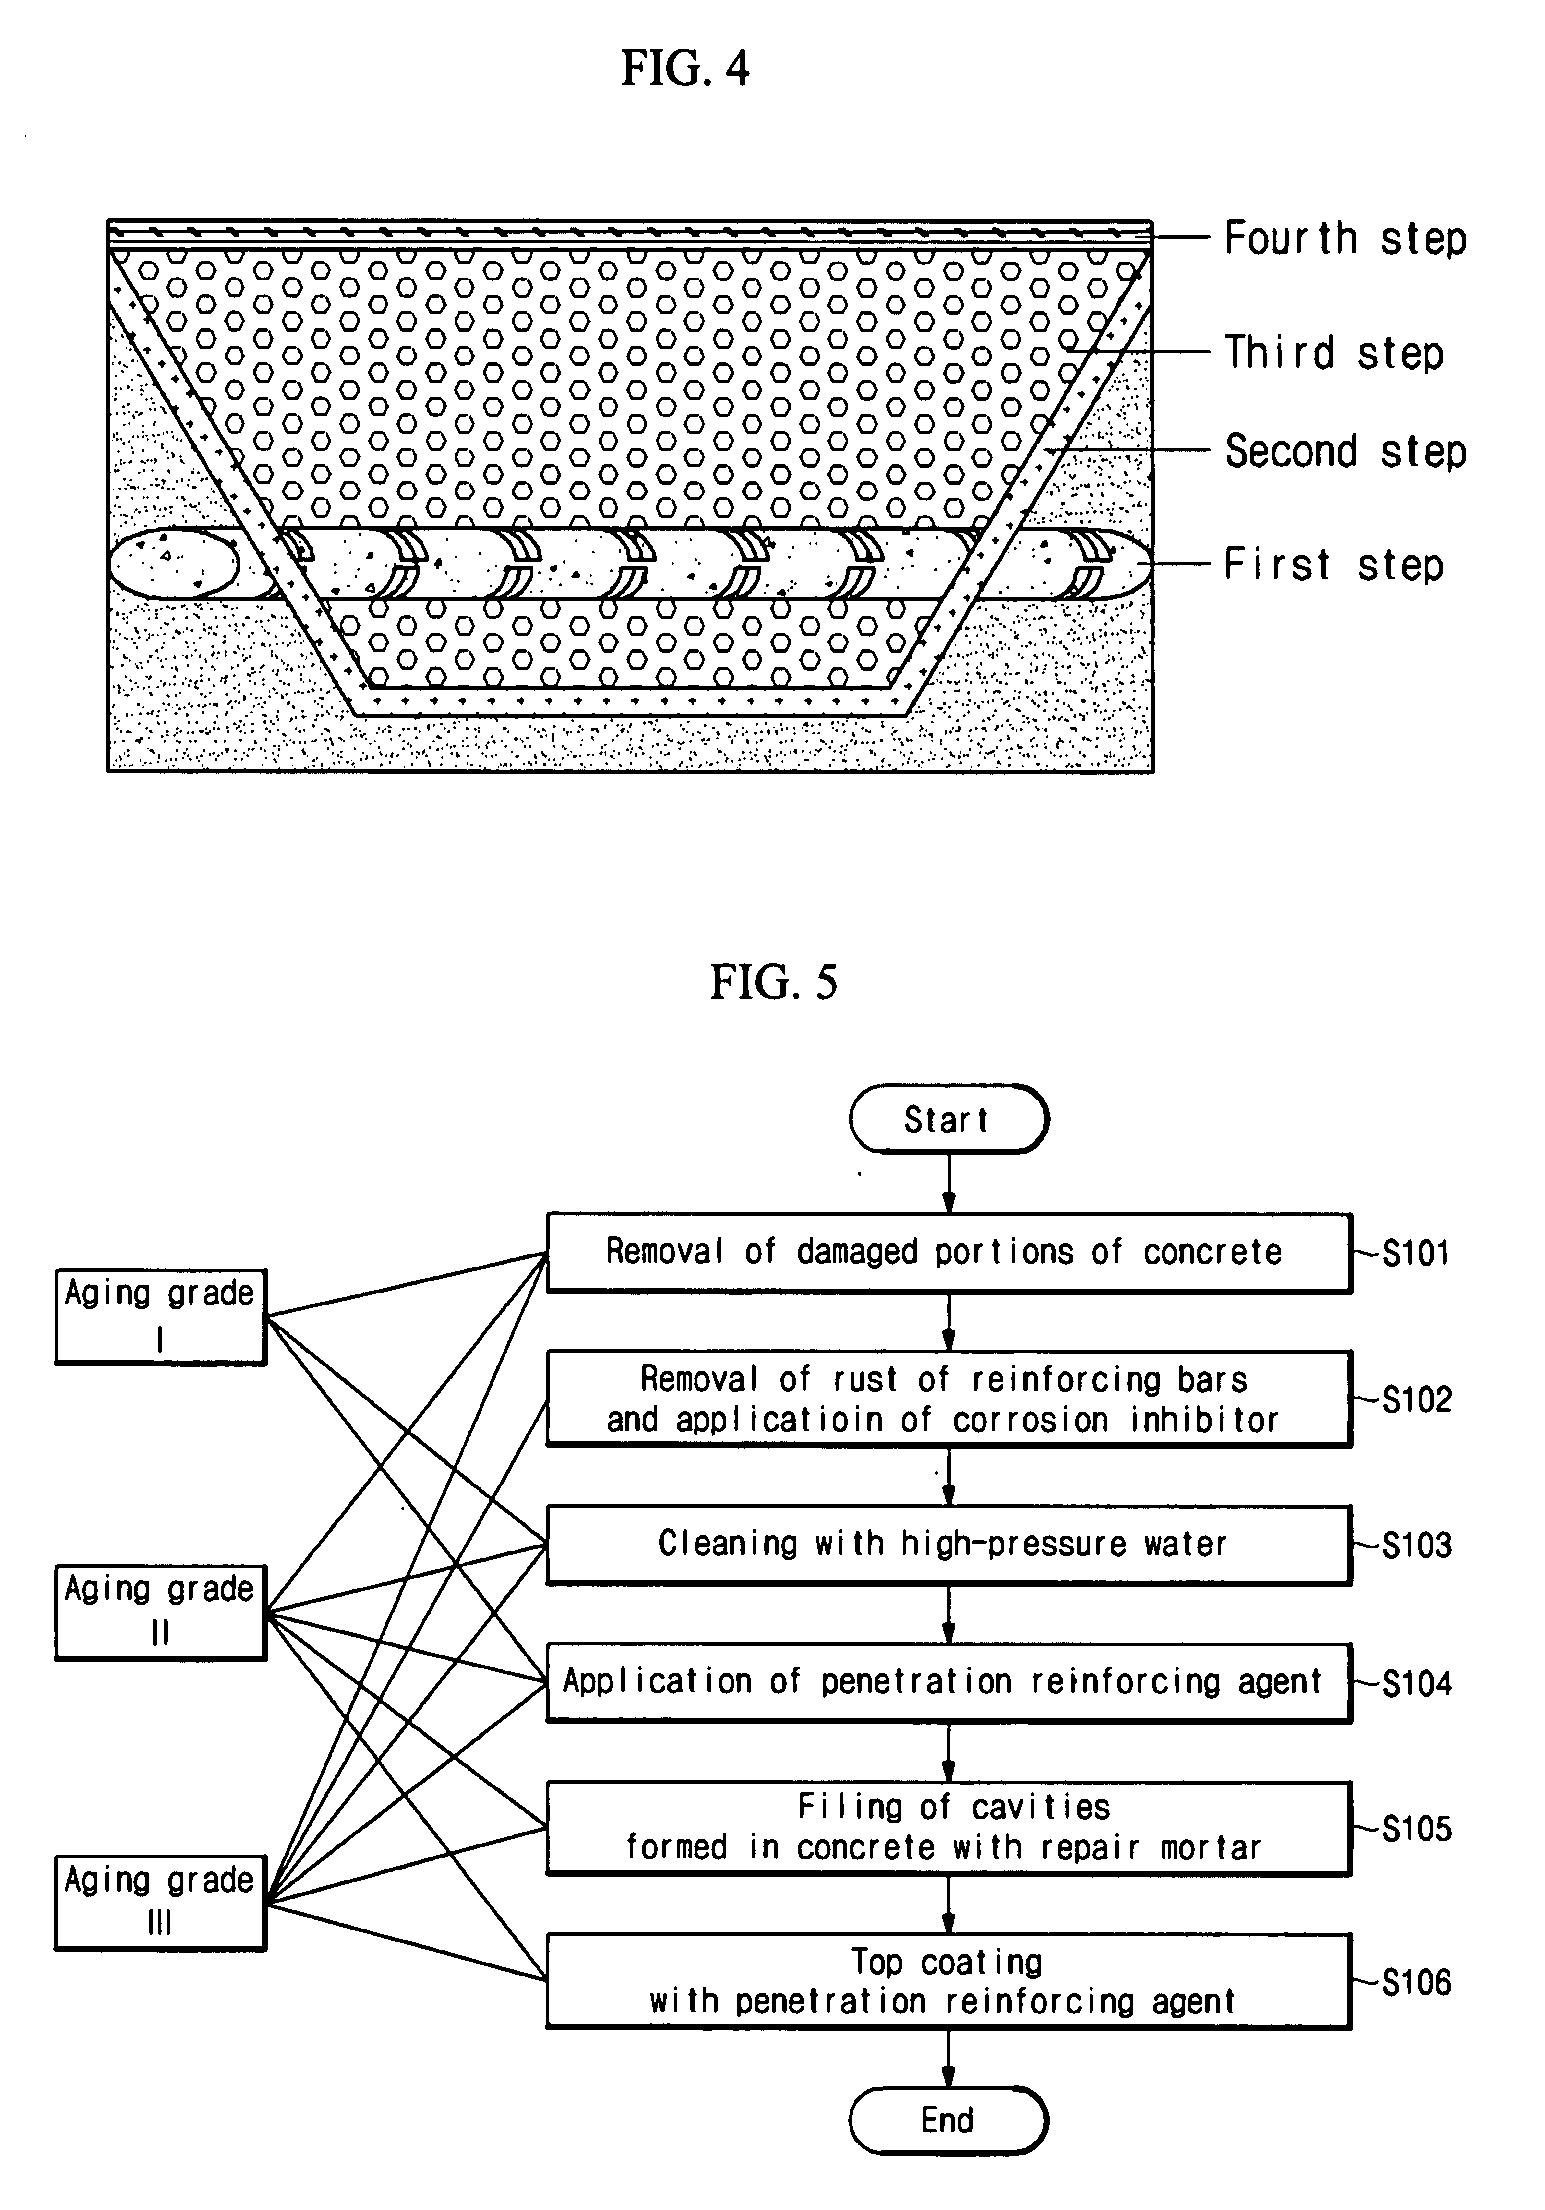 Method for repairing aged reinforced concrete structure using surface-penetration reinforcing agent